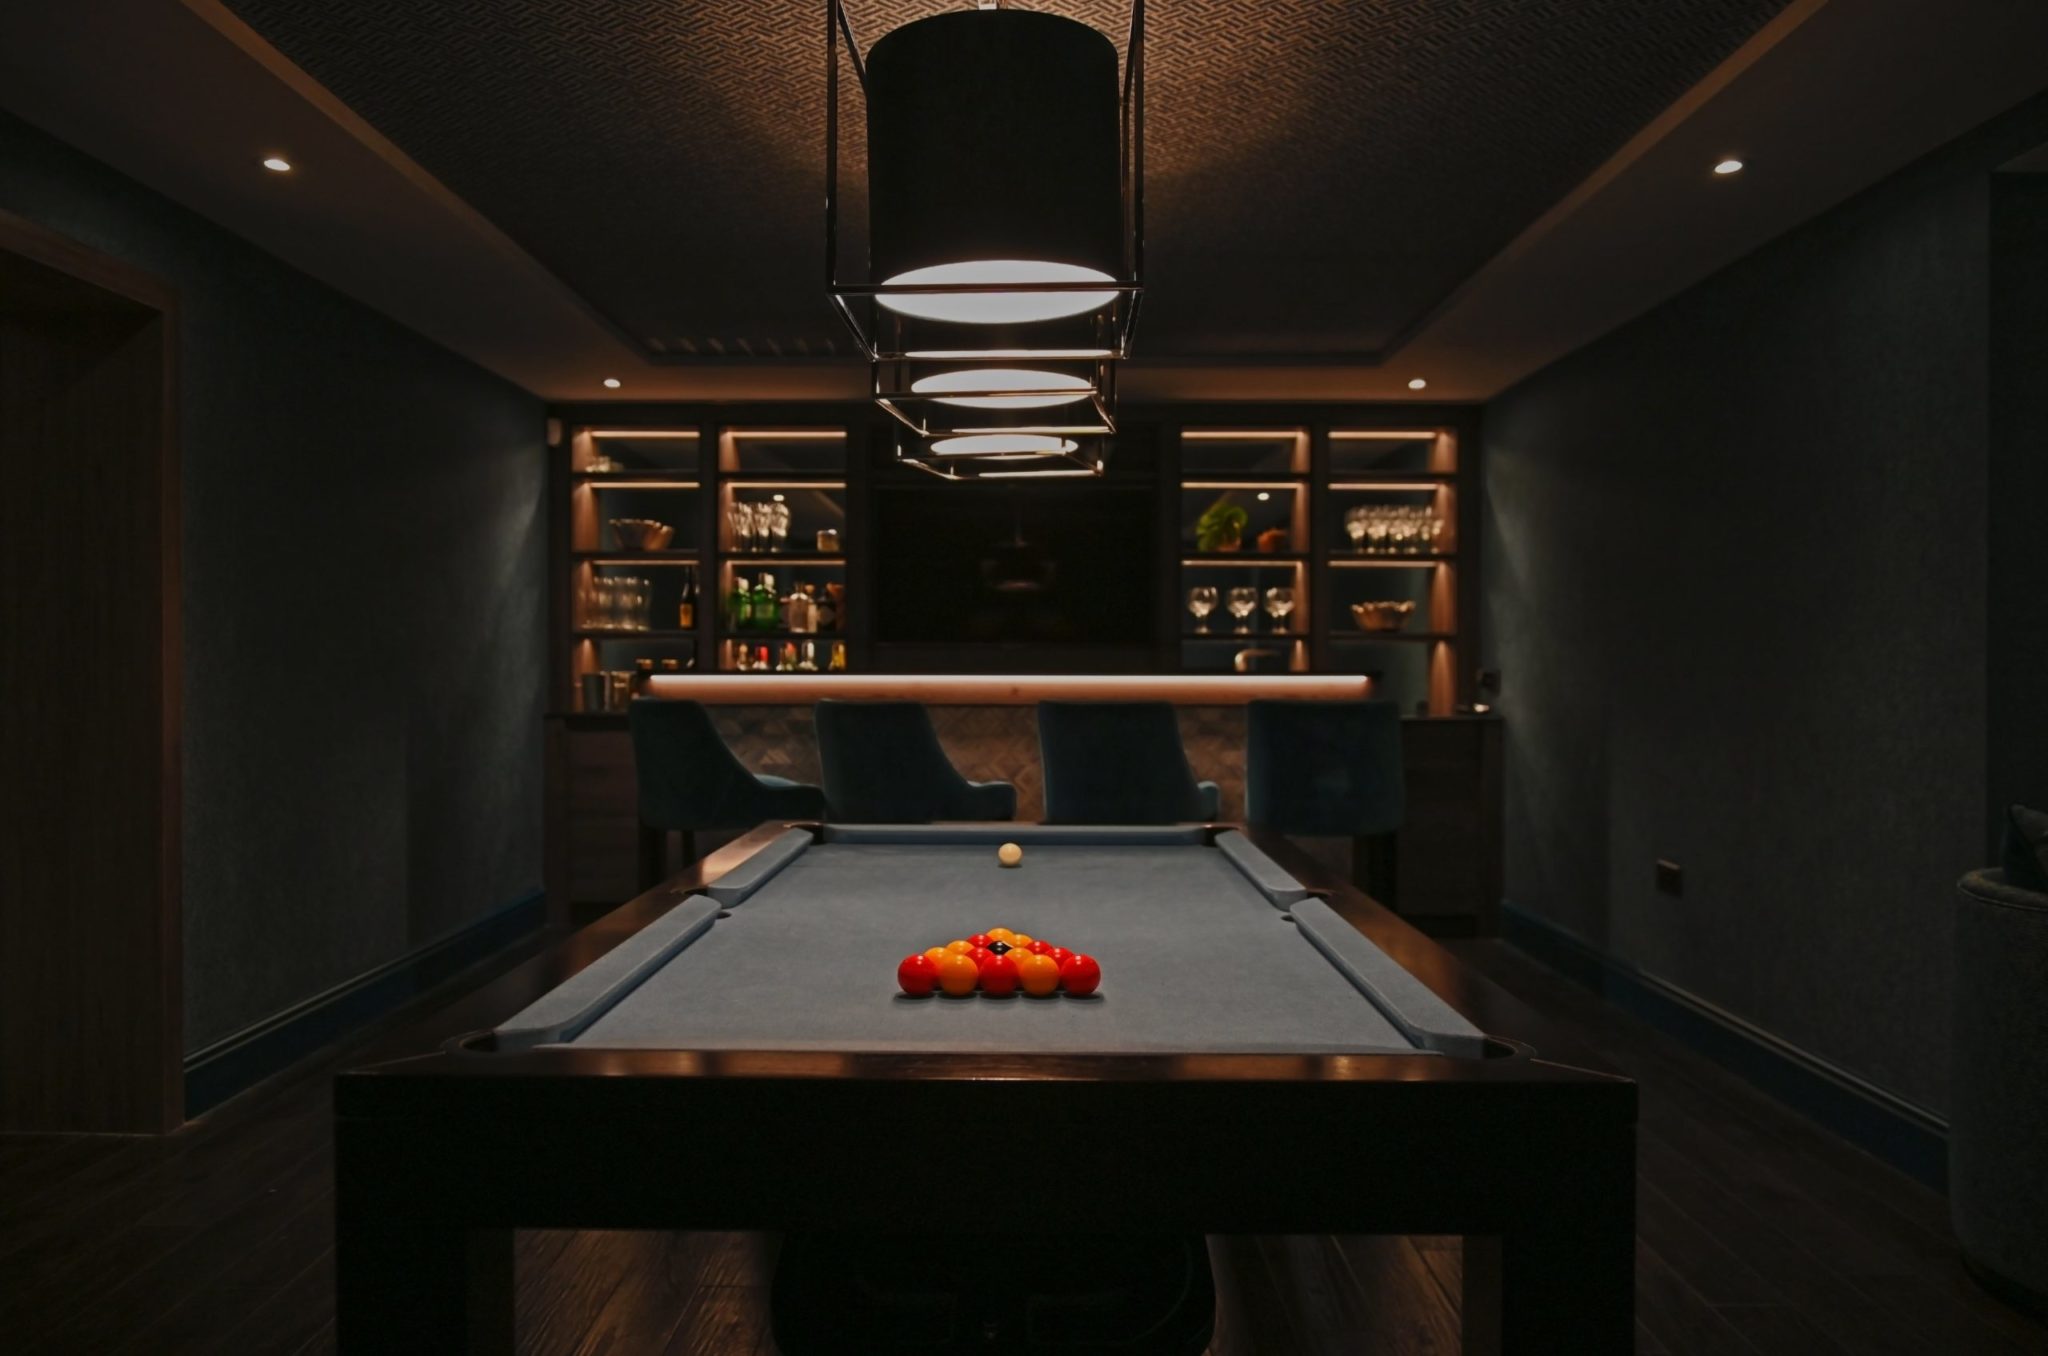 a pool table in a dimly lit room.